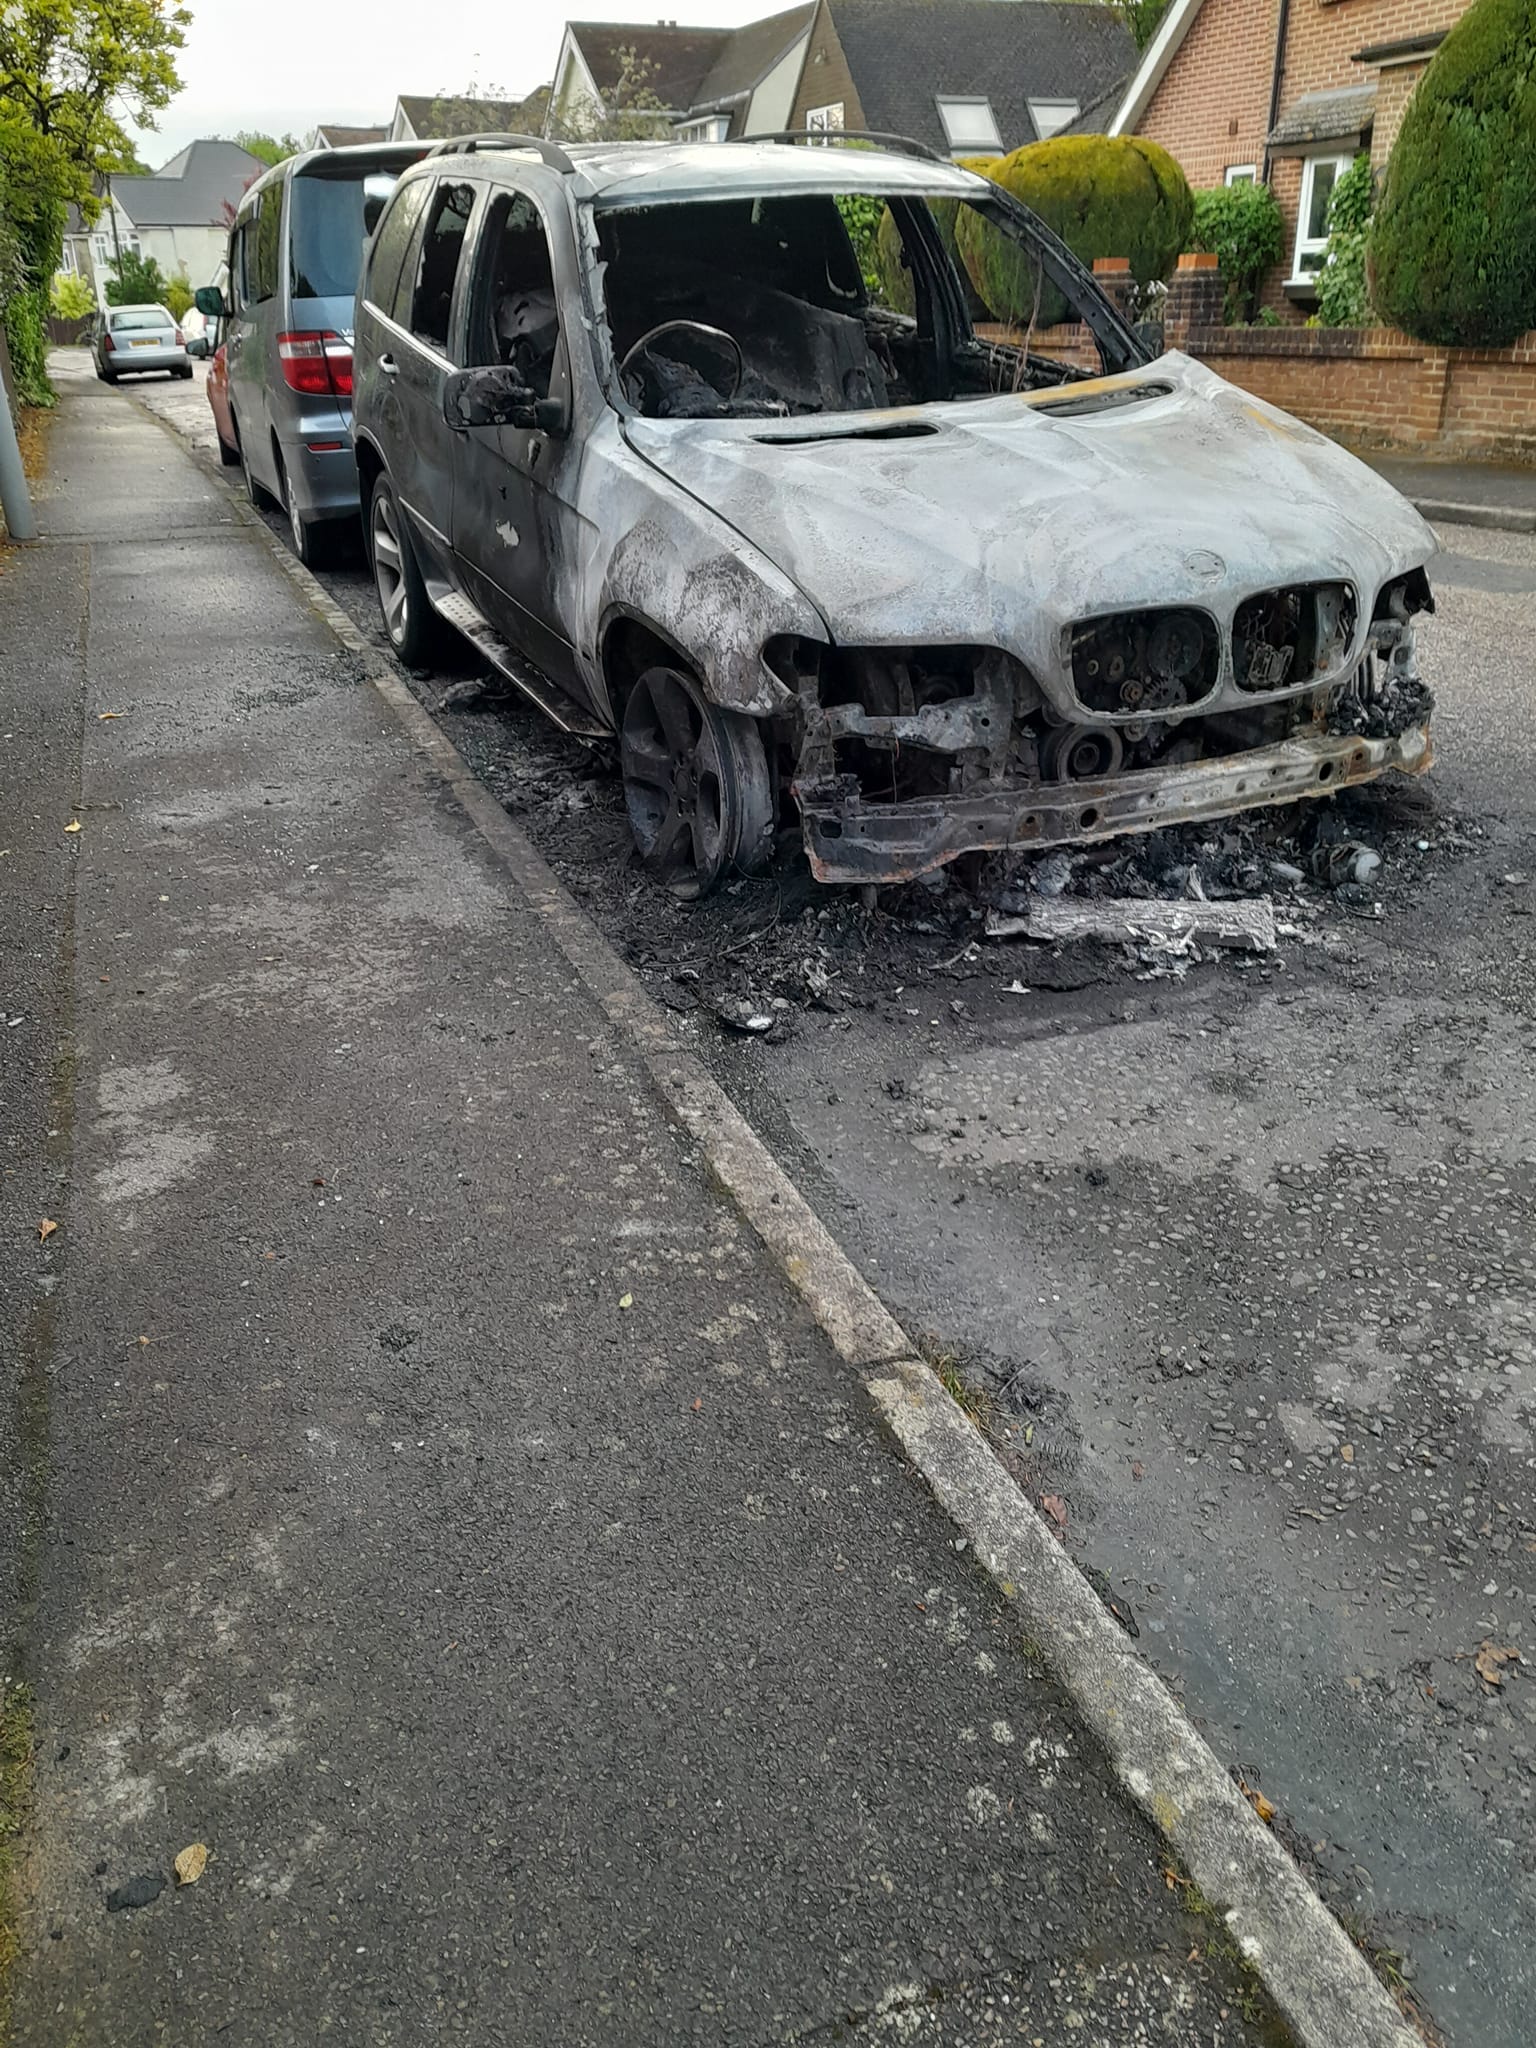 Photo of a car that was set ablaze during the early hours of Monday morning in Wimborne, Dorset